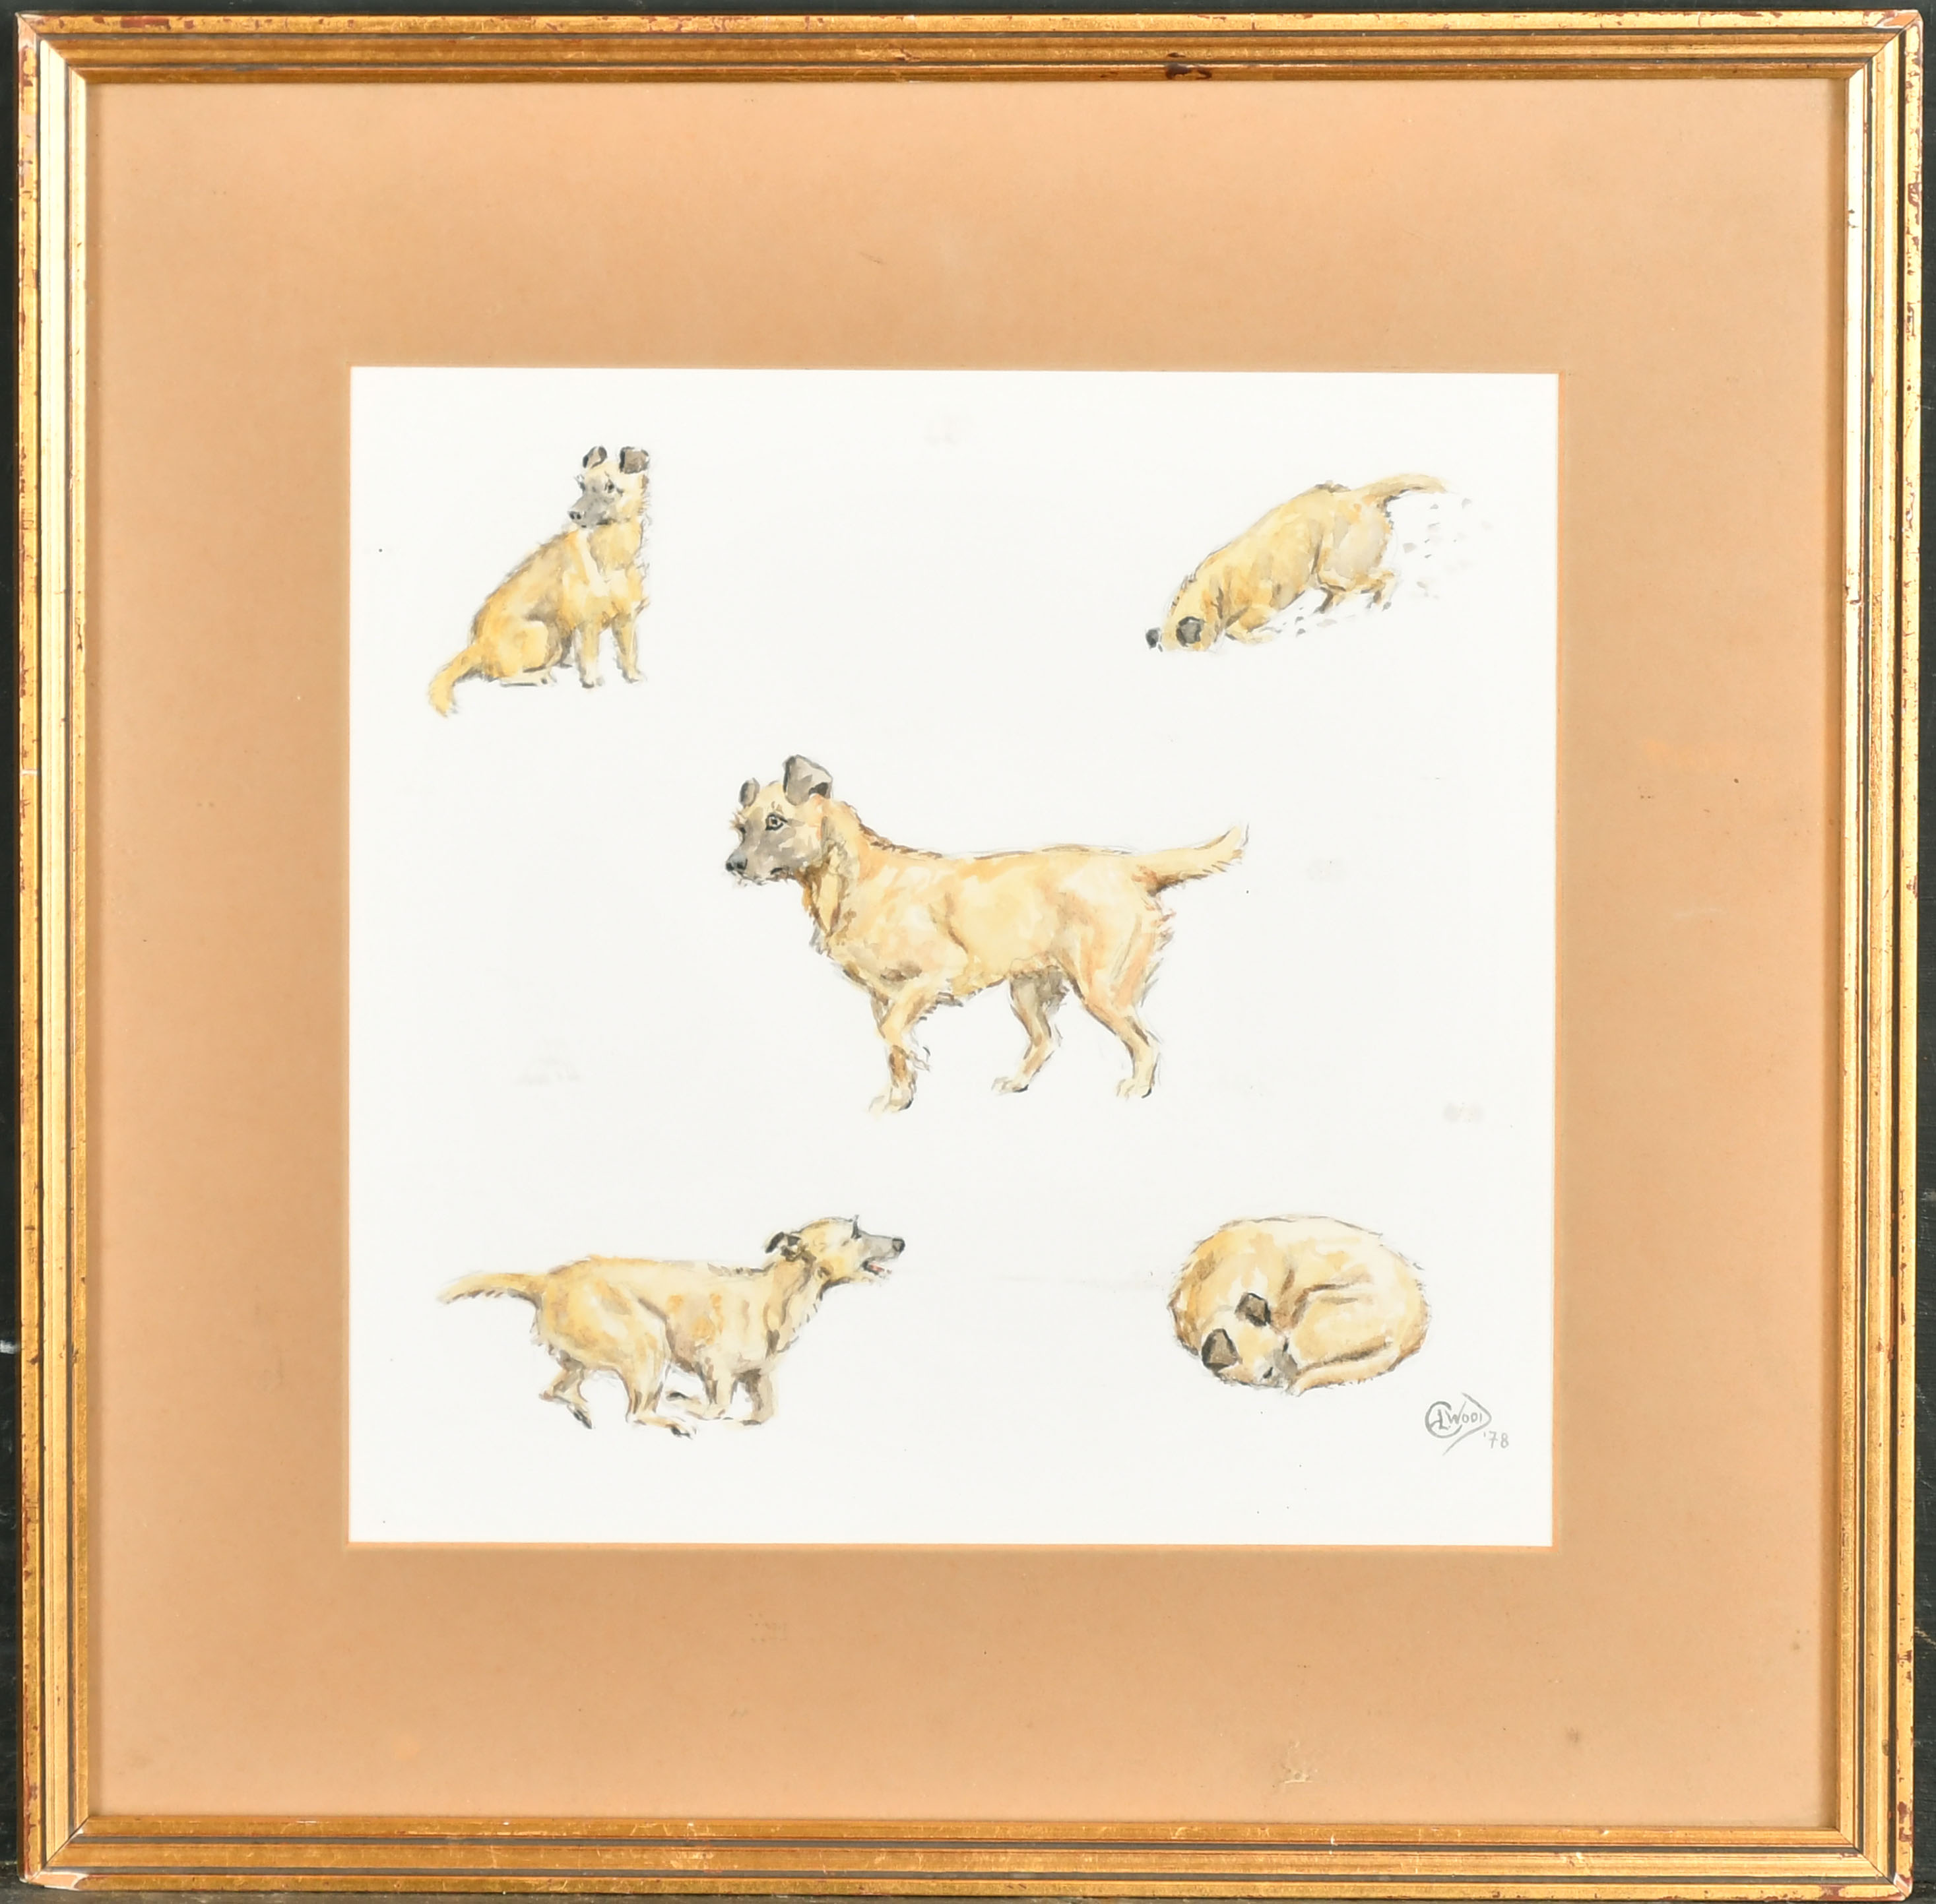 E L Wood (20th Century) British. Terrier Studies, Watercolour and pencil, Signed and dated '78, 9" x - Image 2 of 4